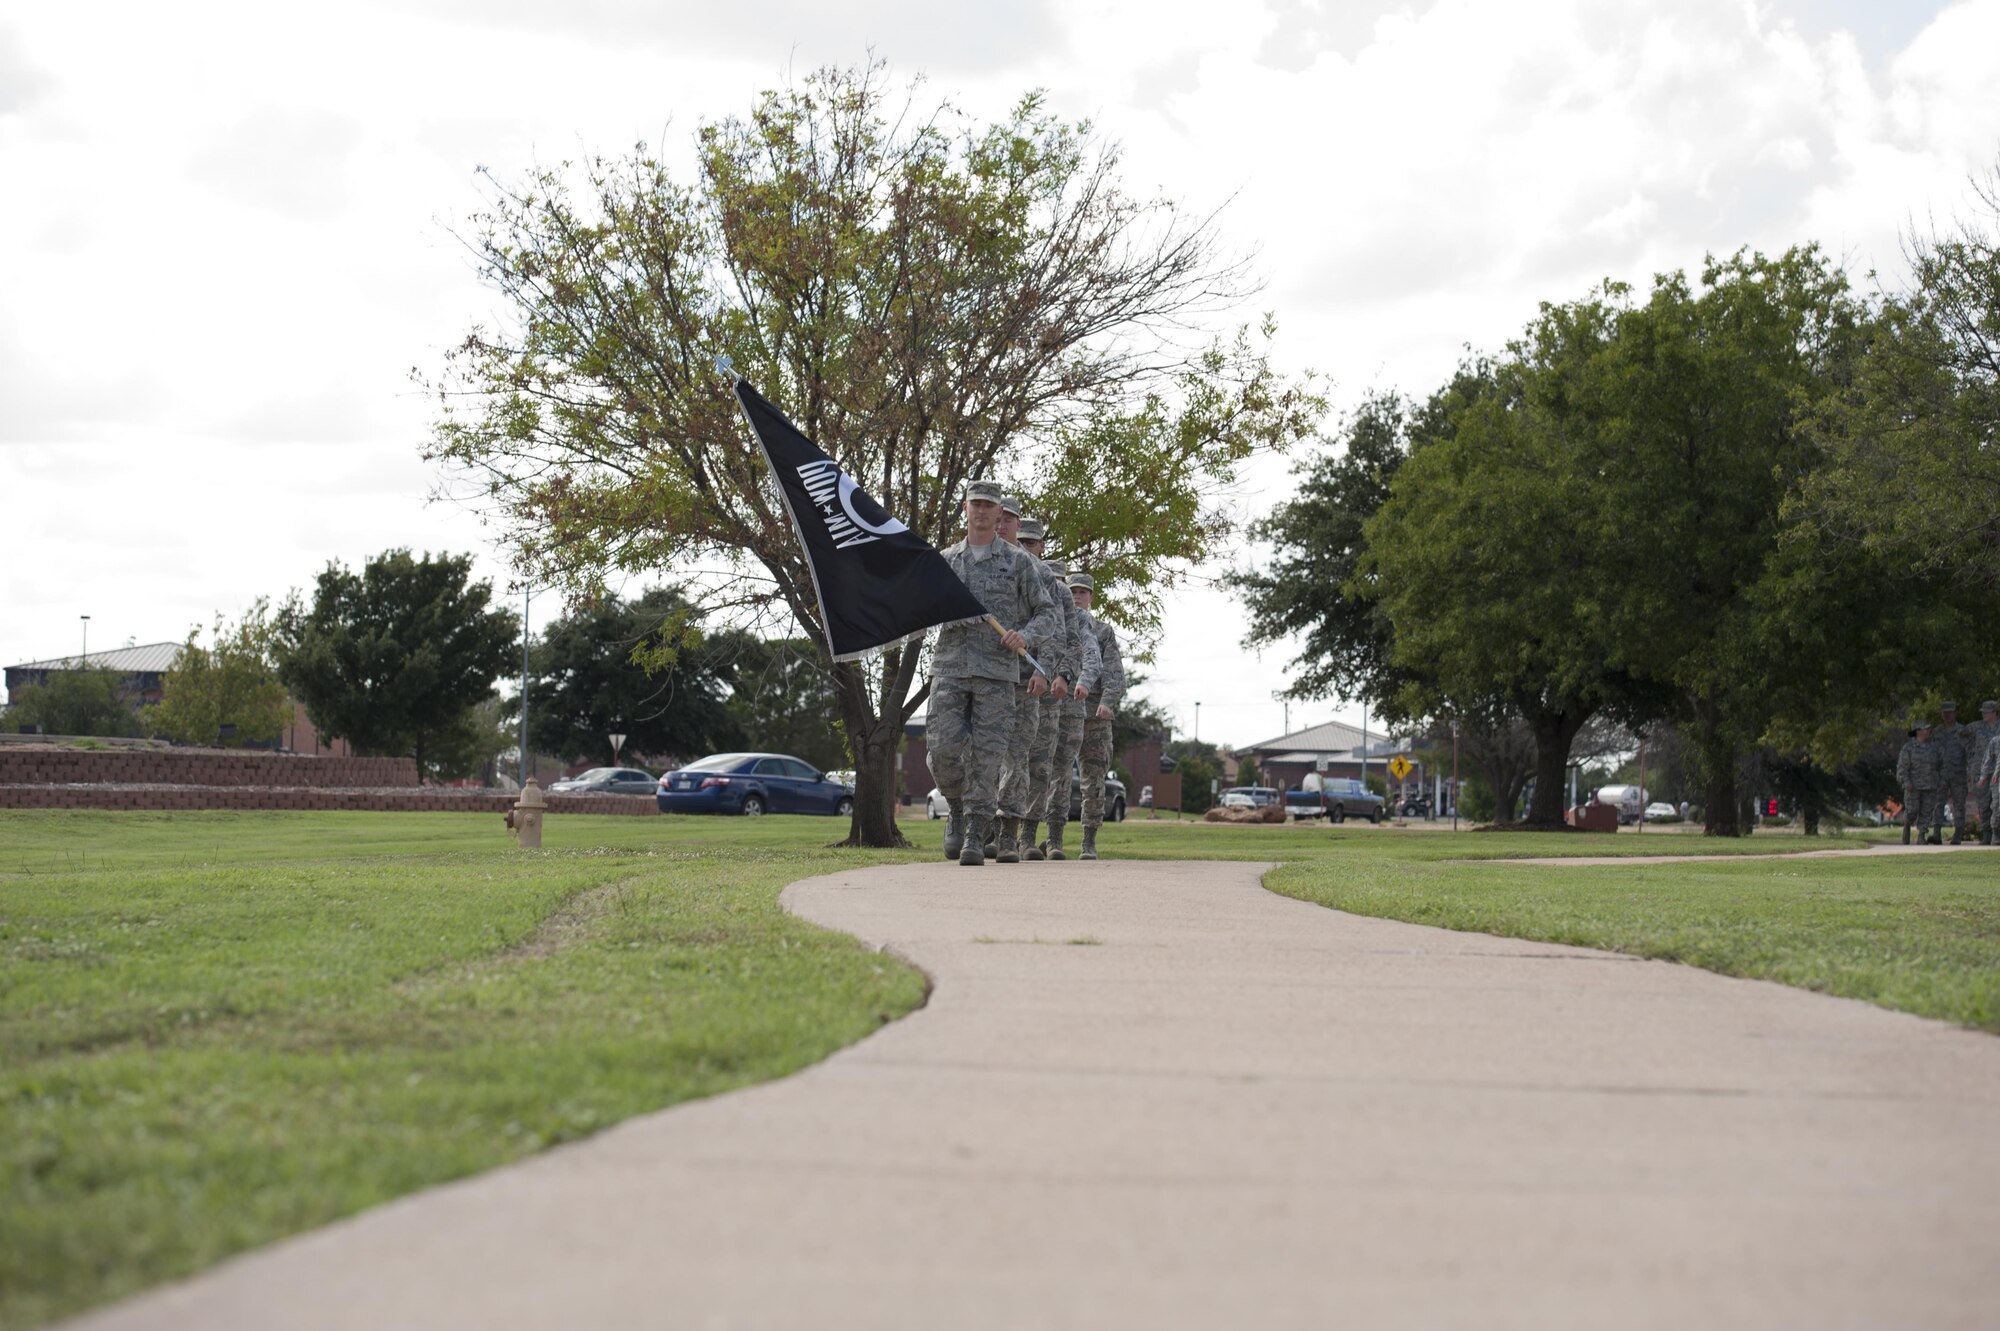 U.S. Air Force Airmen carry the prisoner-of-war/missing-in-action flag as part of the national POW/MIA recognition day, at Dyess Air Force Base, Texas, Sept. 16, 2016. Formations of five Airmen marched from one end to the other of the installation’s linear air park while displaying the POW/MIA flag in order to honor past service members lost and missing. (U.S. Air Force photo by Airman 1st Class Rebecca Van Syoc)